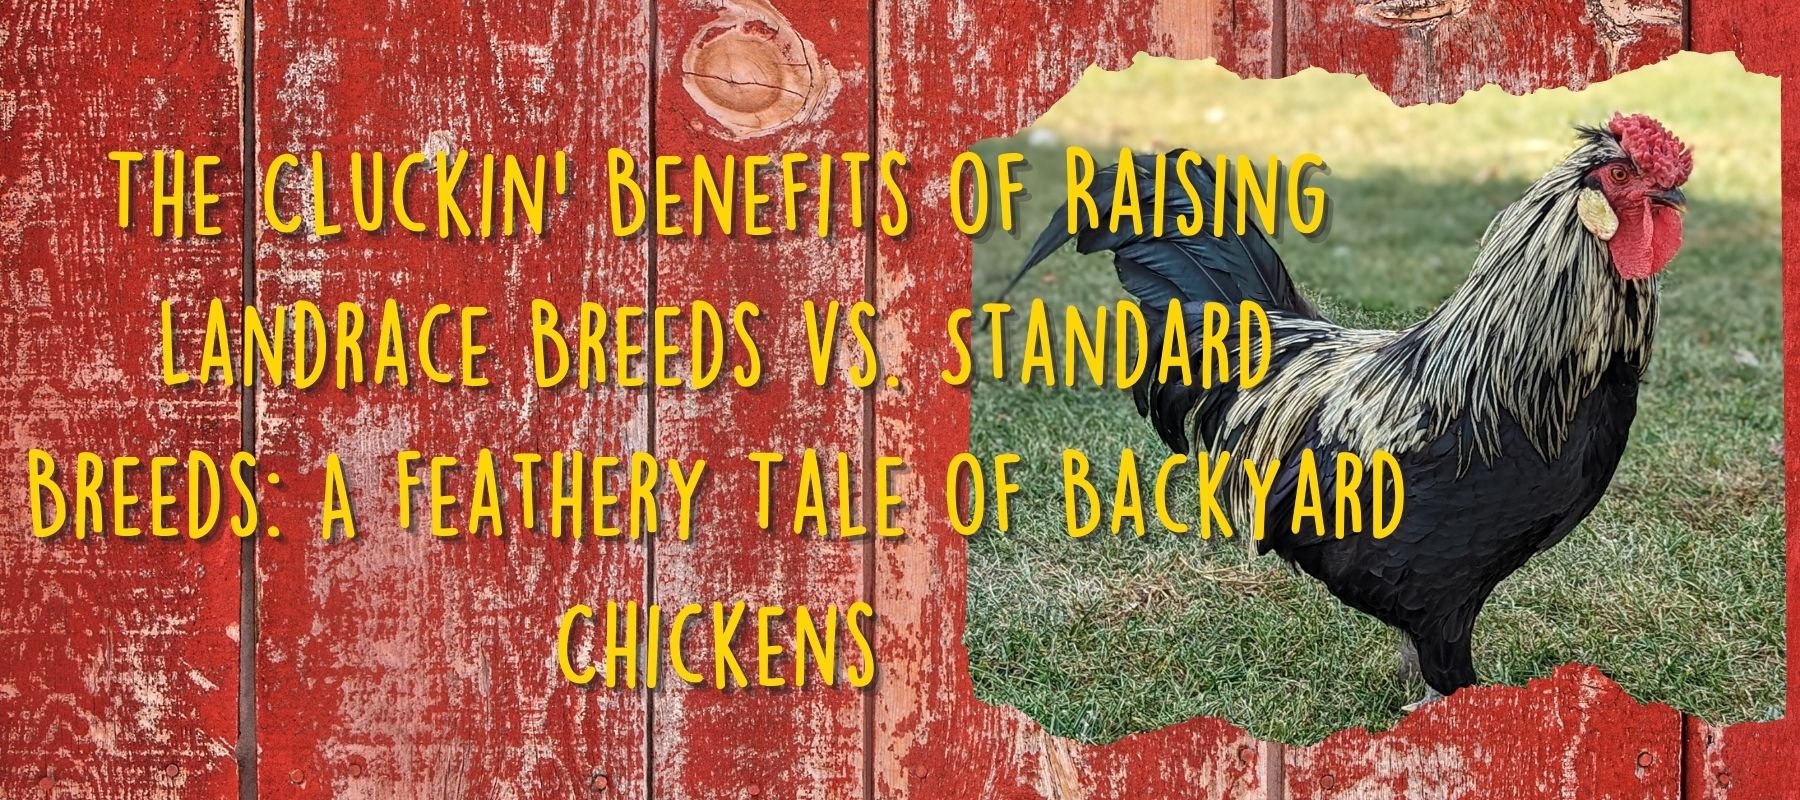 The Cluckin' Benefits of Raising Landrace Breeds vs. Standard Breeds: A Feathery Tale of Backyard Chickens - Cluck It All Farms